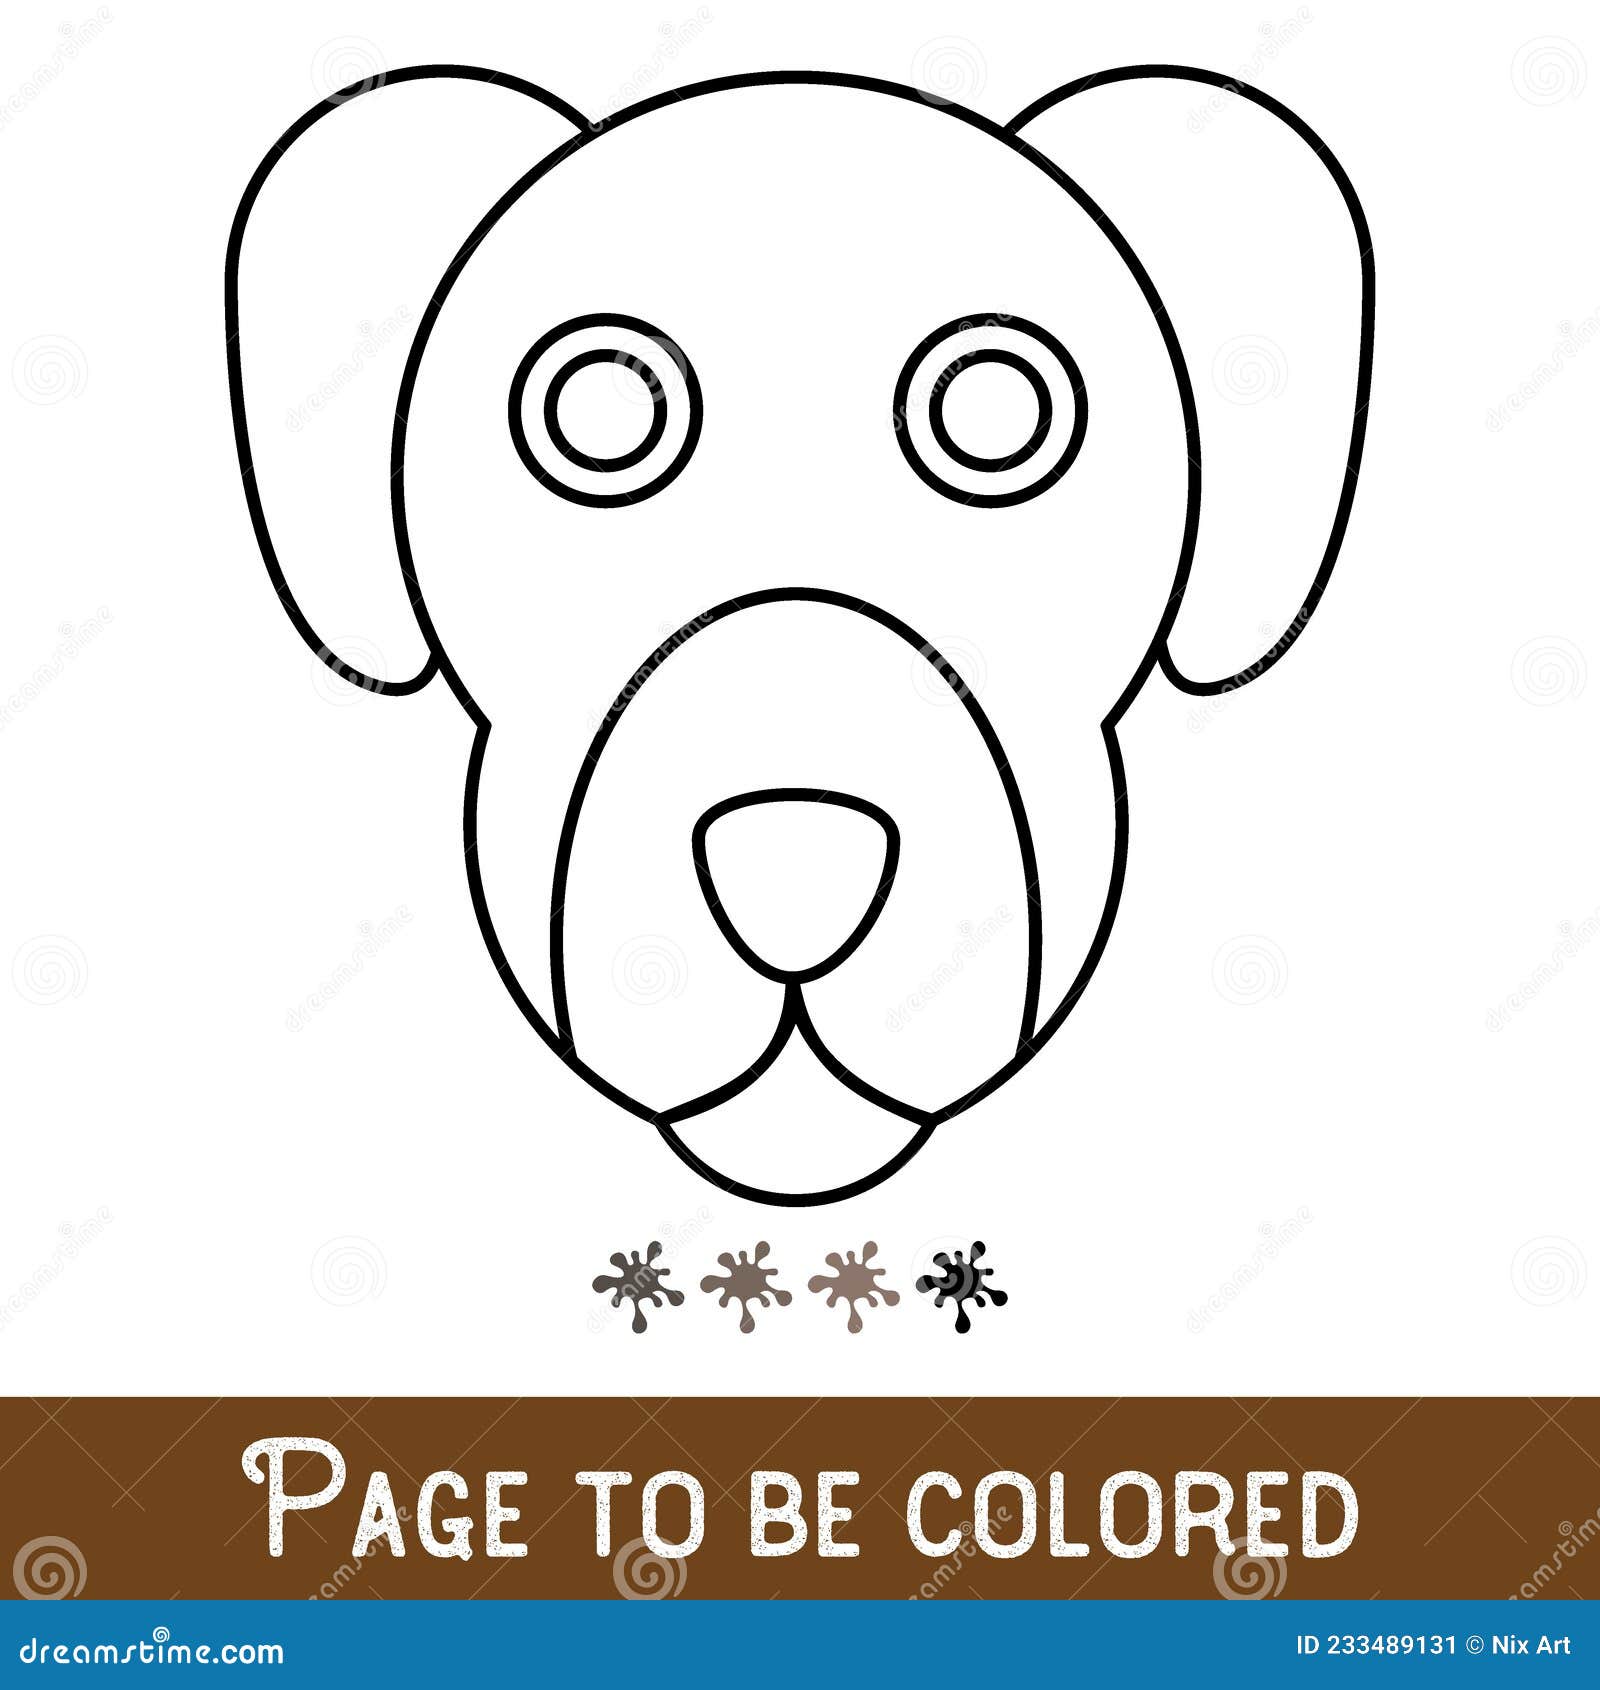 Funny dog face to be colored the coloring book for preschool kids with easy educational gaming level mediumvector stock vector